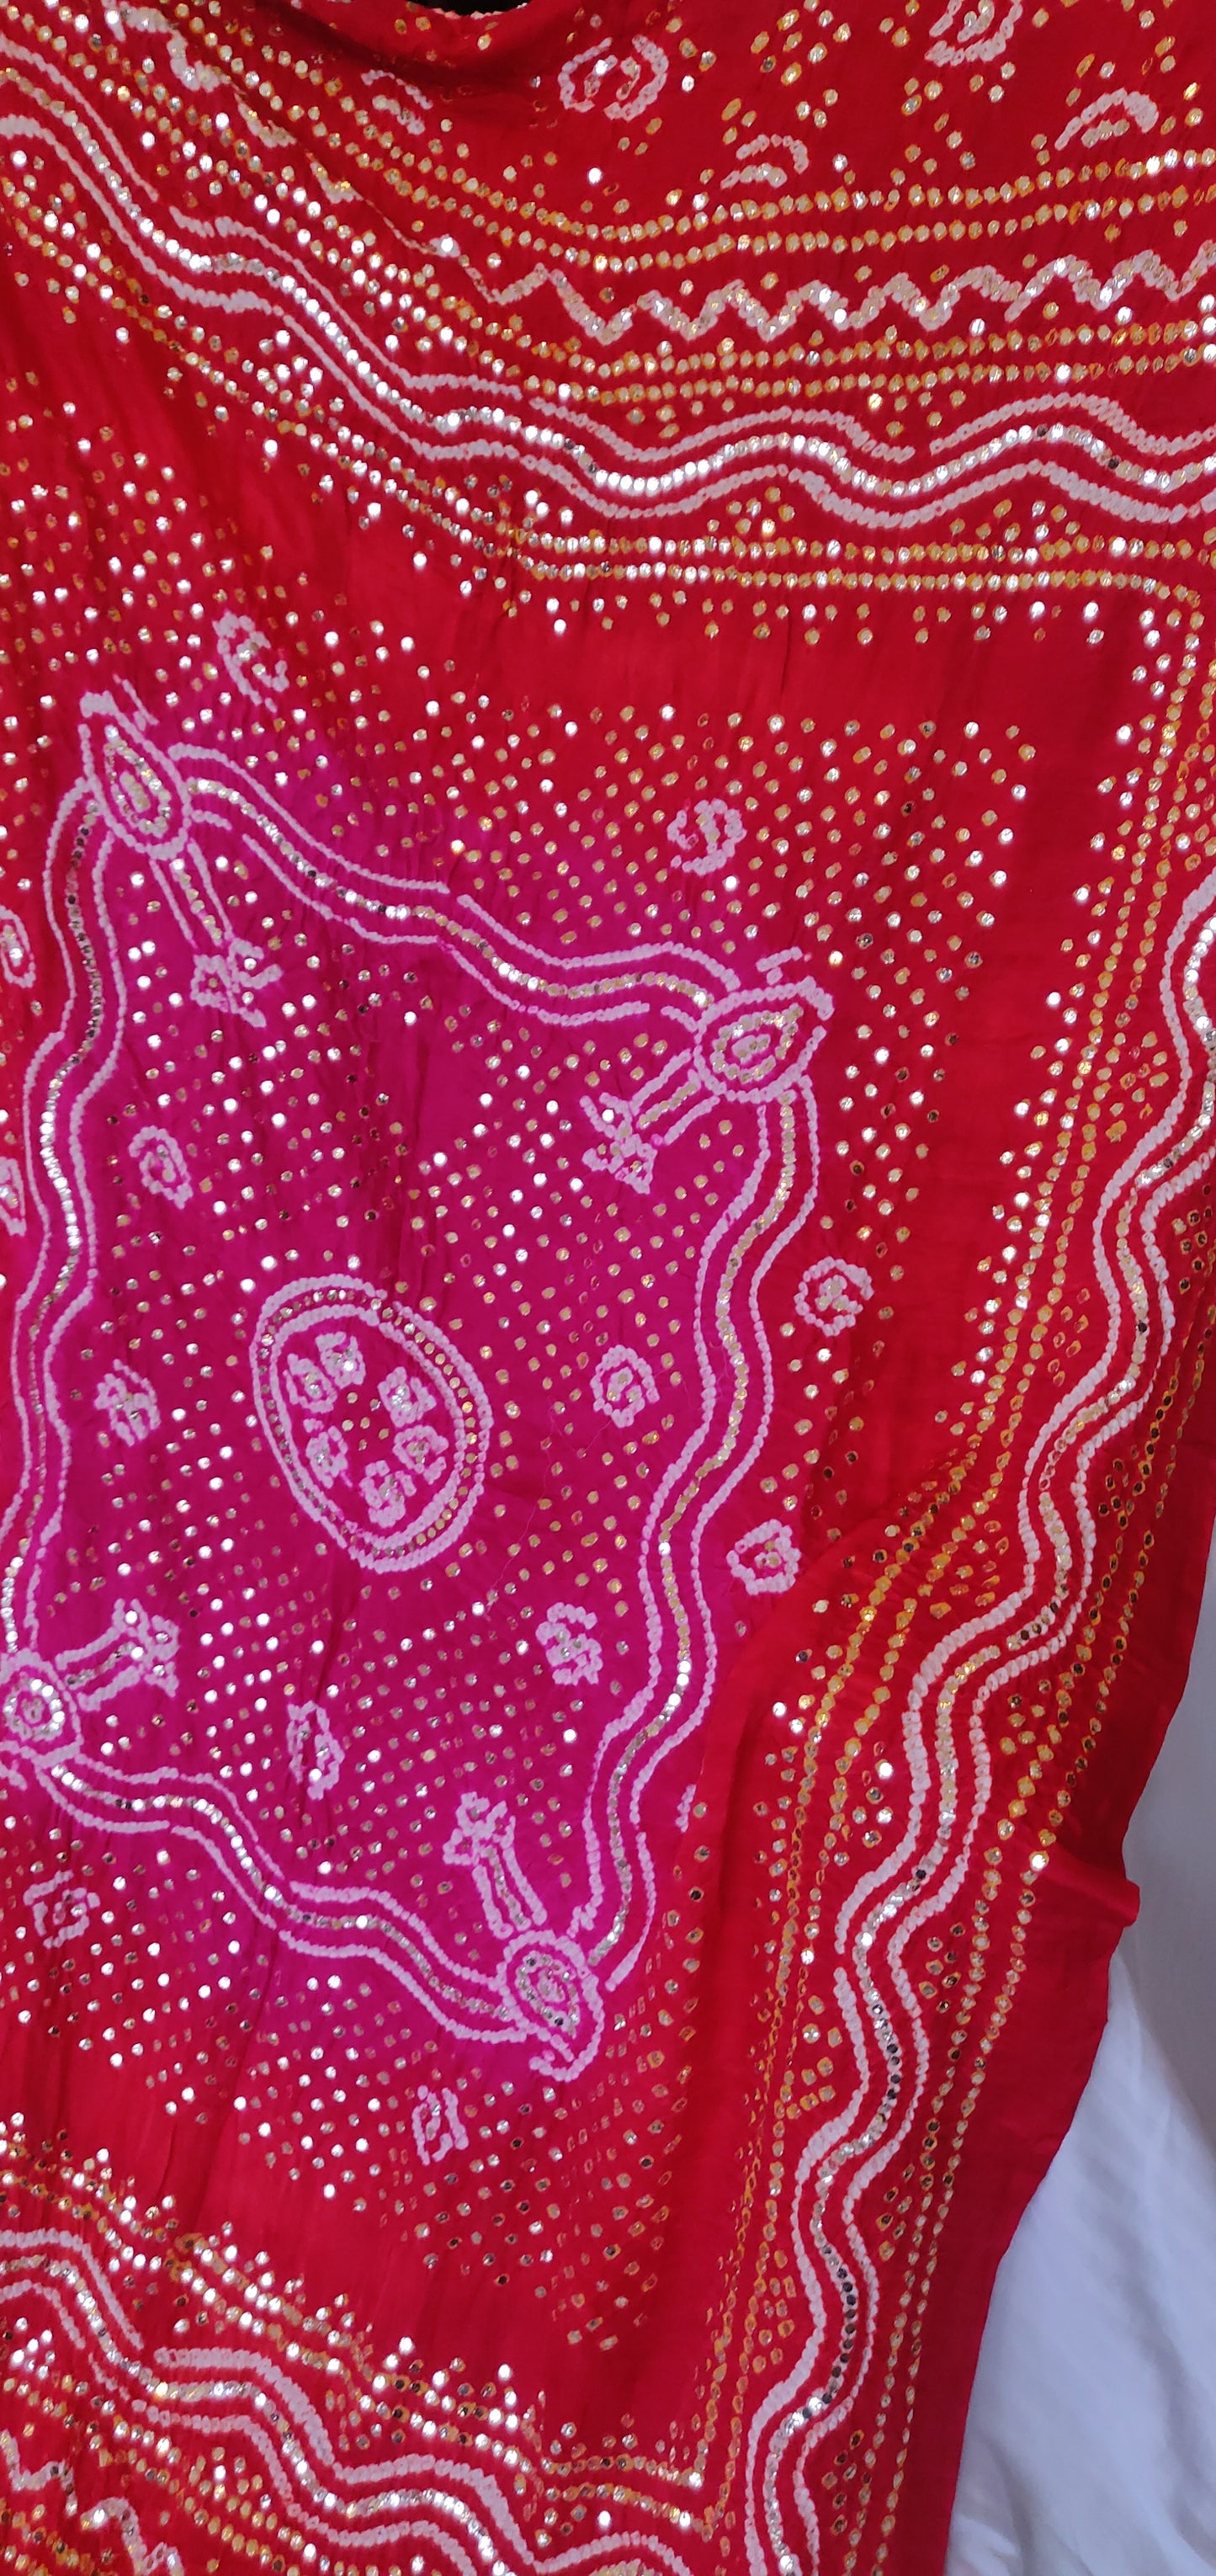 Red and Pink Bandhej Dupatta with Allover Mukaish